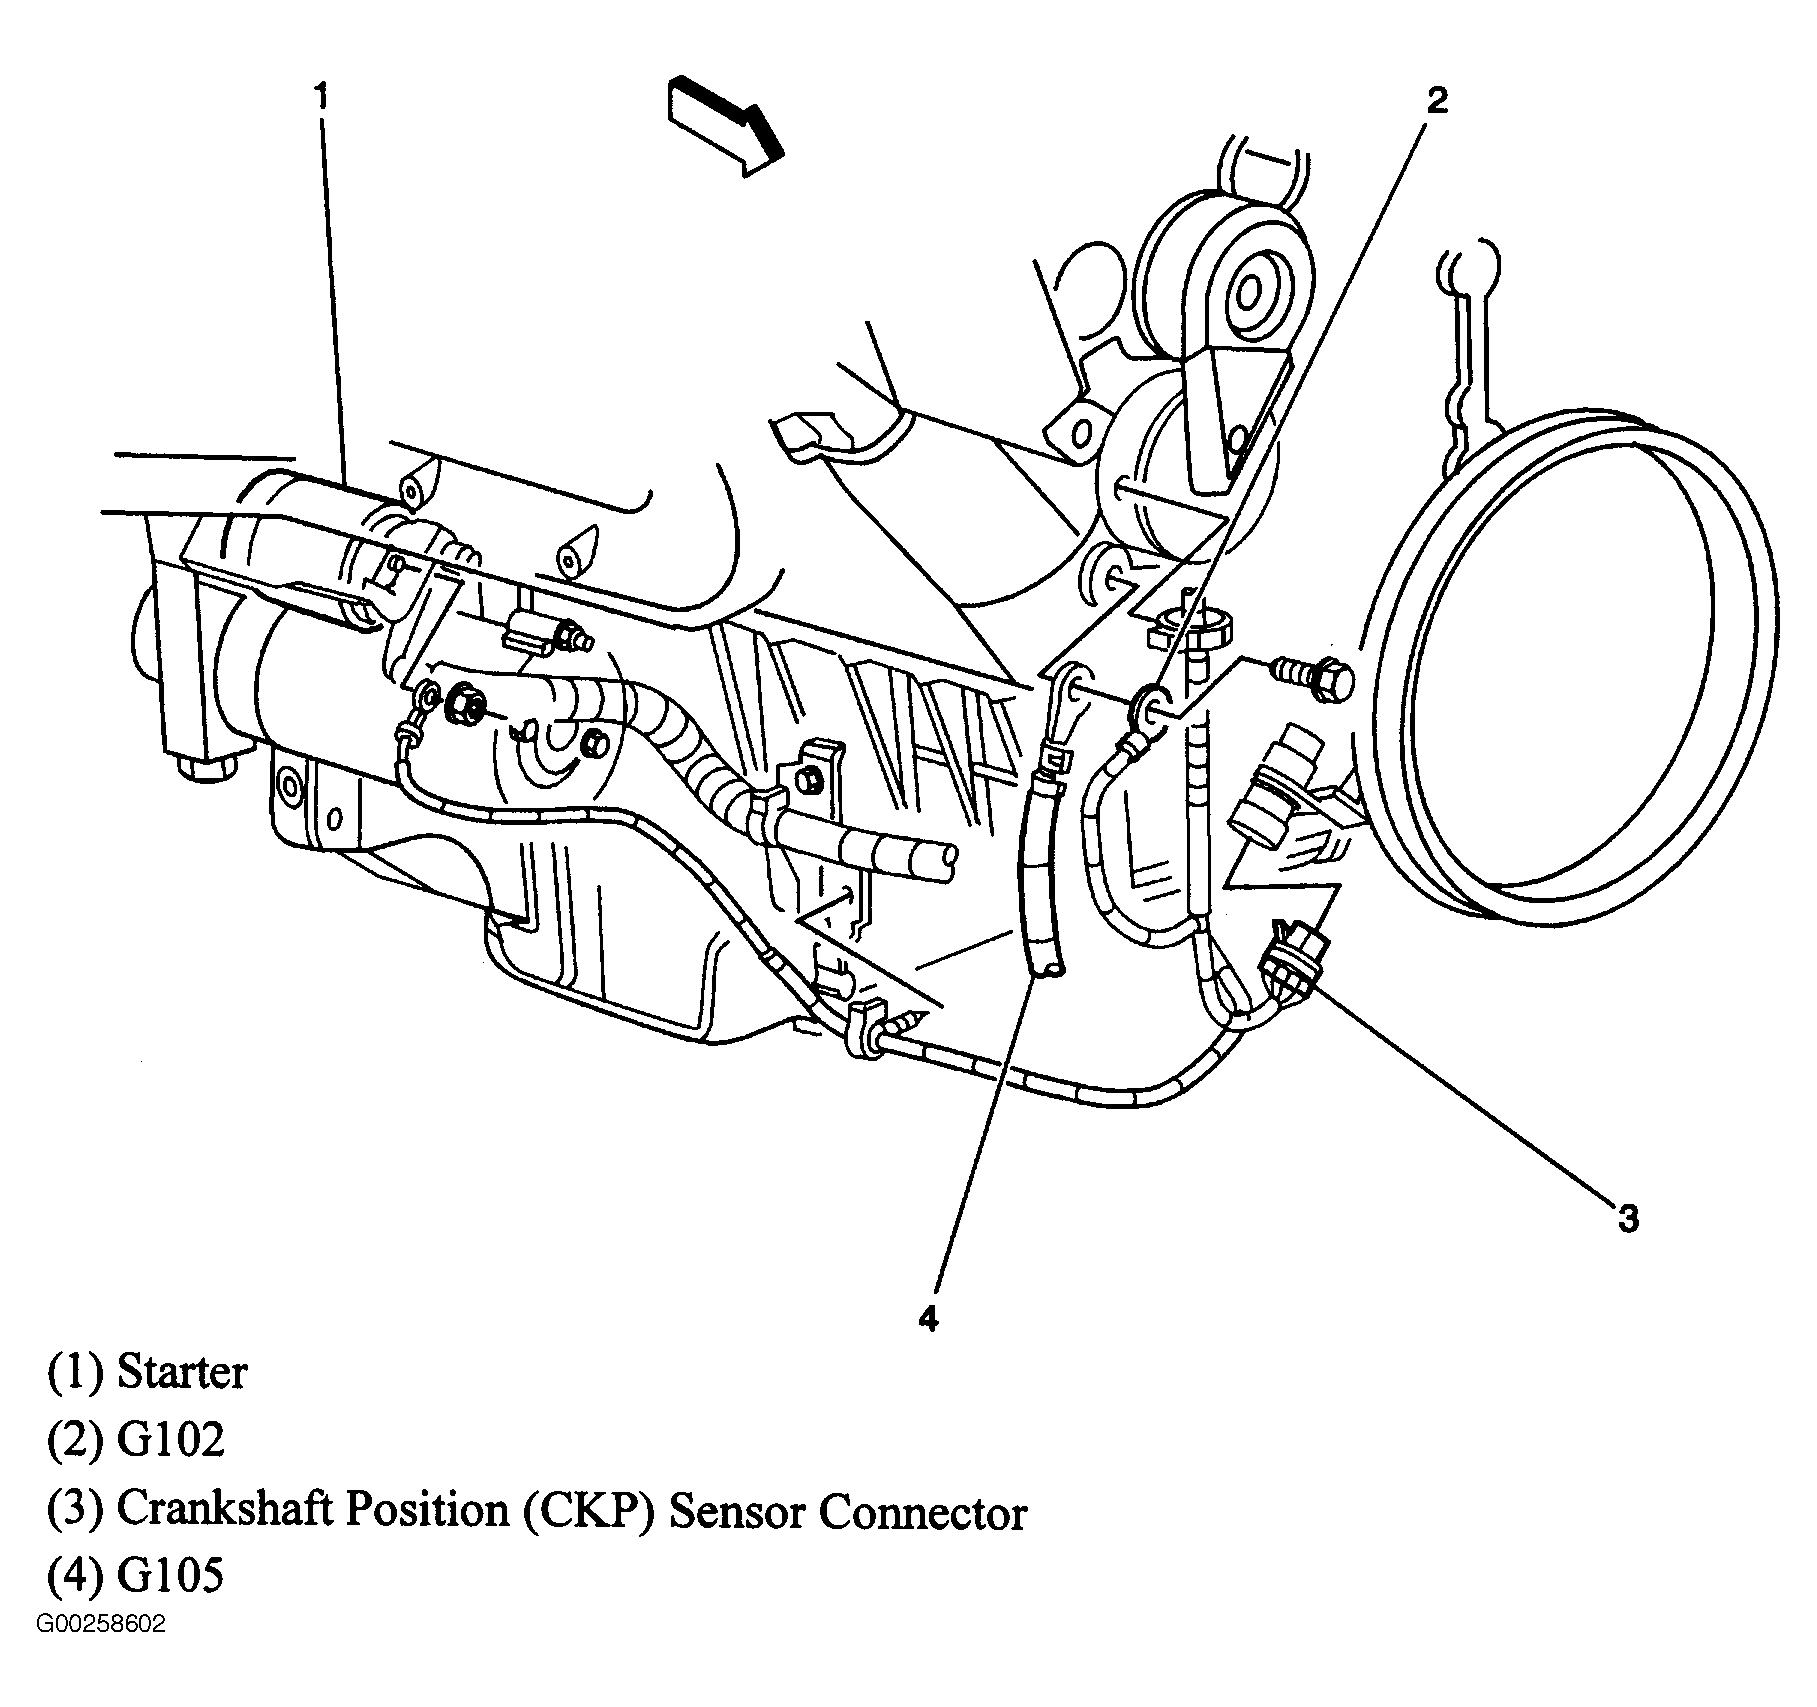 GMC Sierra Classic 1500 2007 - Component Locations -  Lower Right Side Of Engine (4.3L, 4.8L, 5.3L & 6.0L)